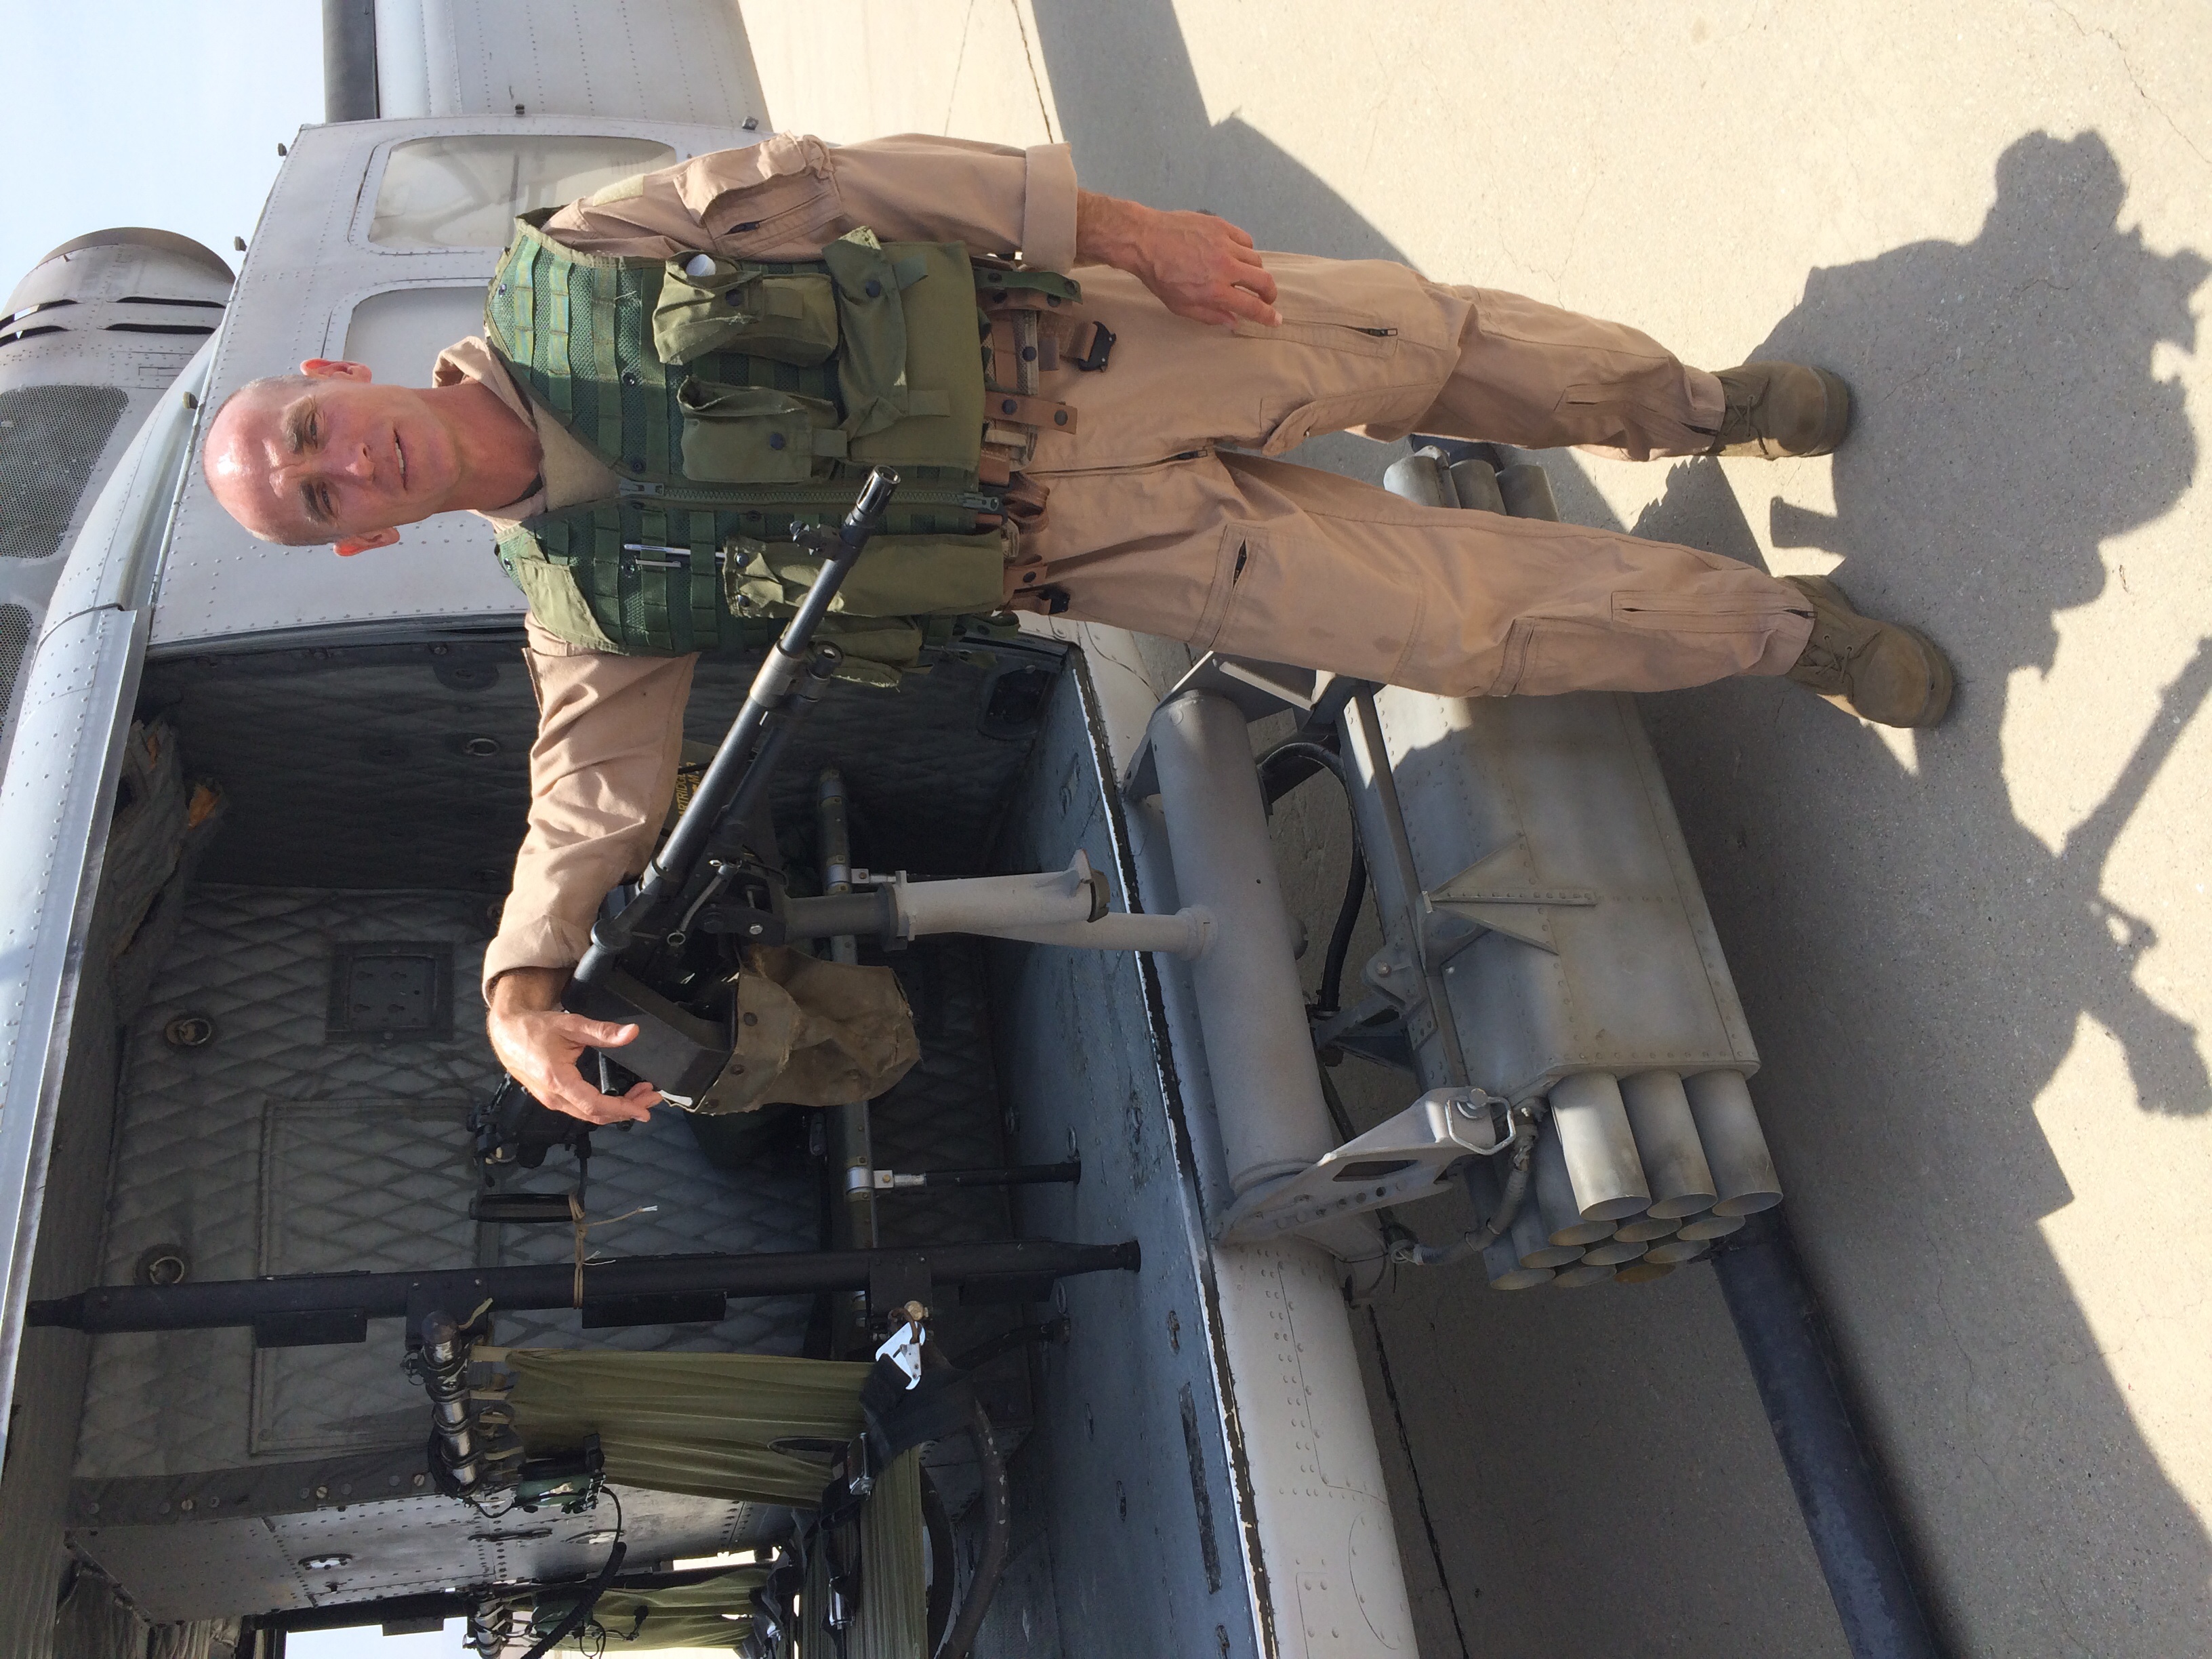 Flying on Huey as a door gunner director Clint Eastwood on American Sniper